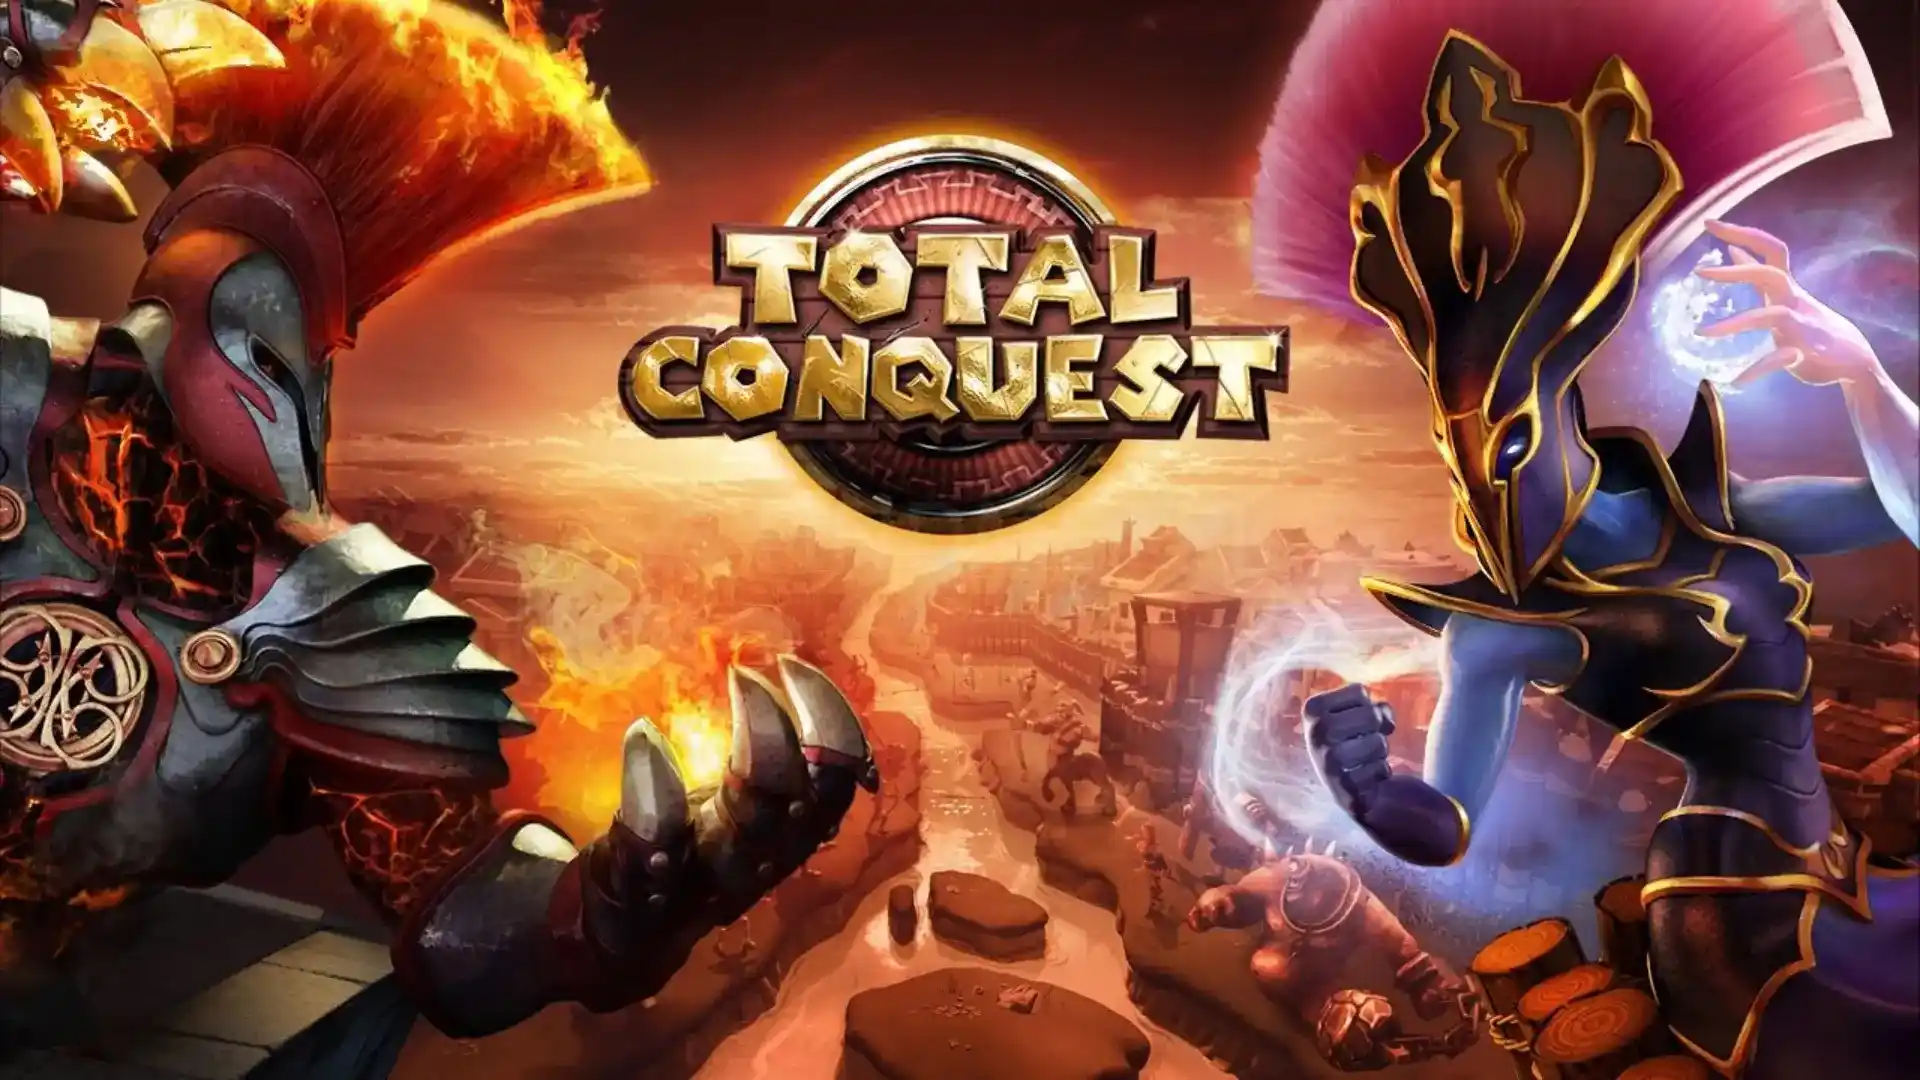 Total conquest feature image